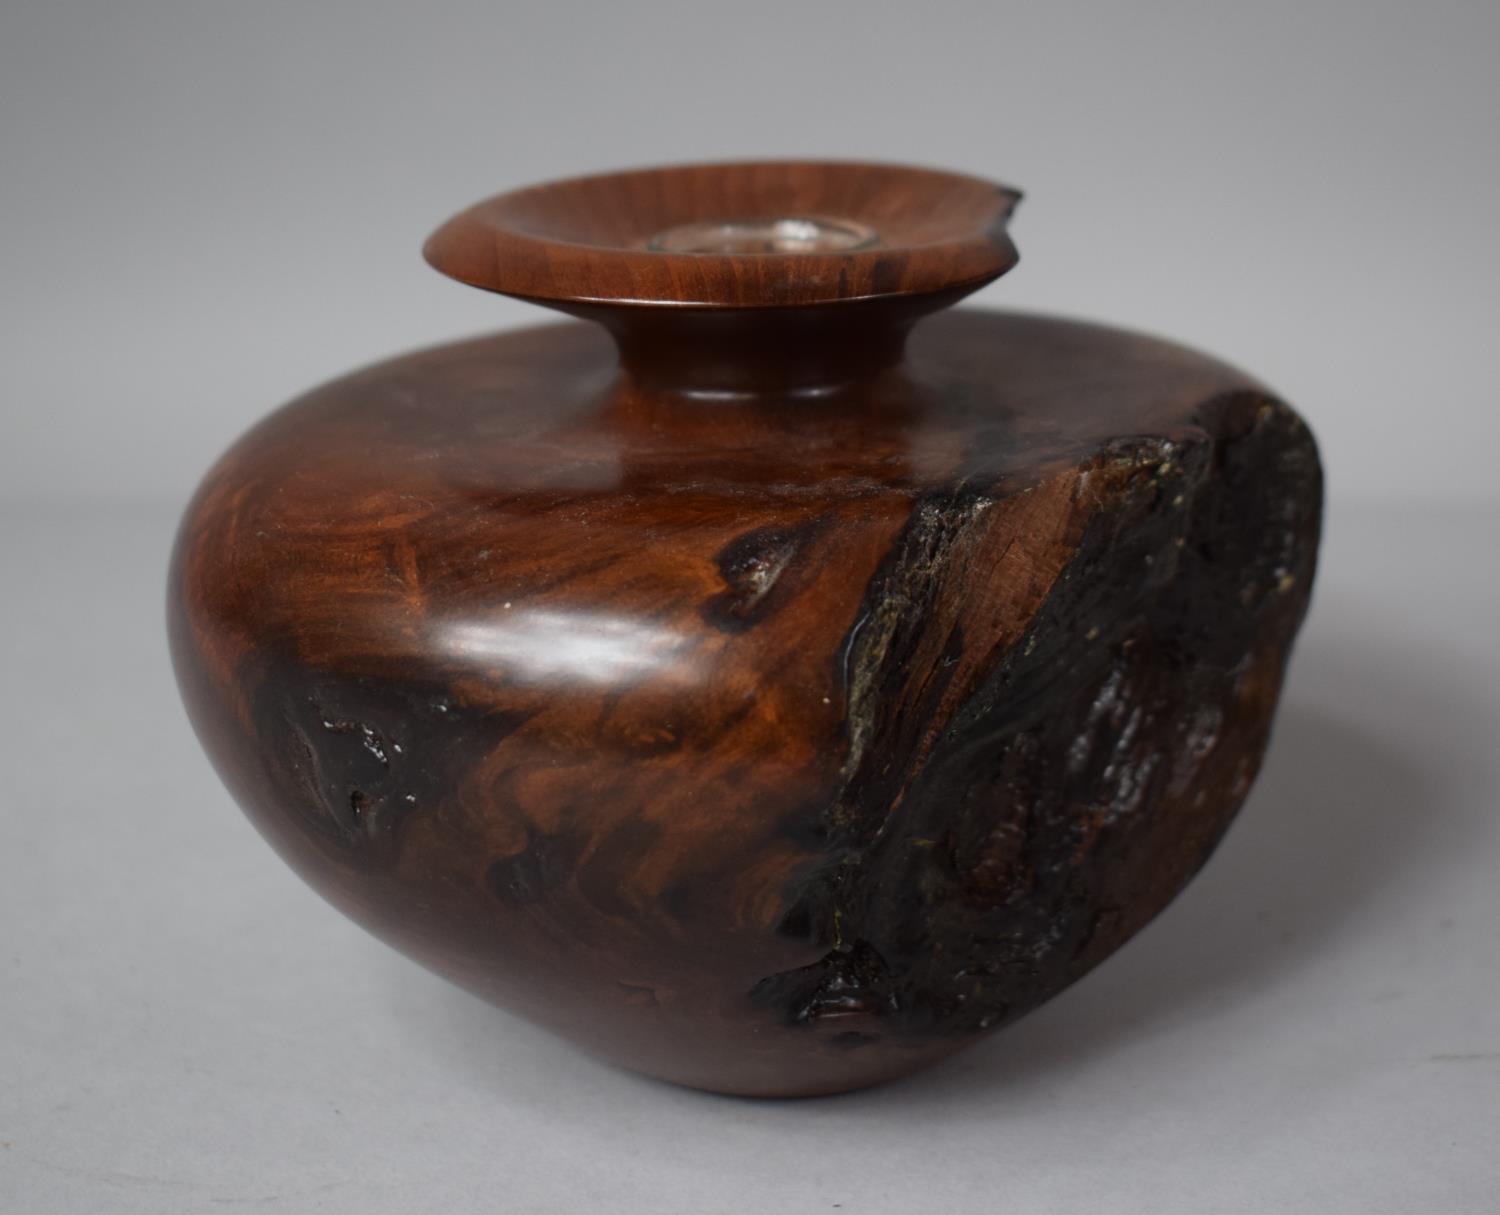 A Turned Wooden Vase with Glass Liner Formed From California Red Wood Burl, 14cm Diameter